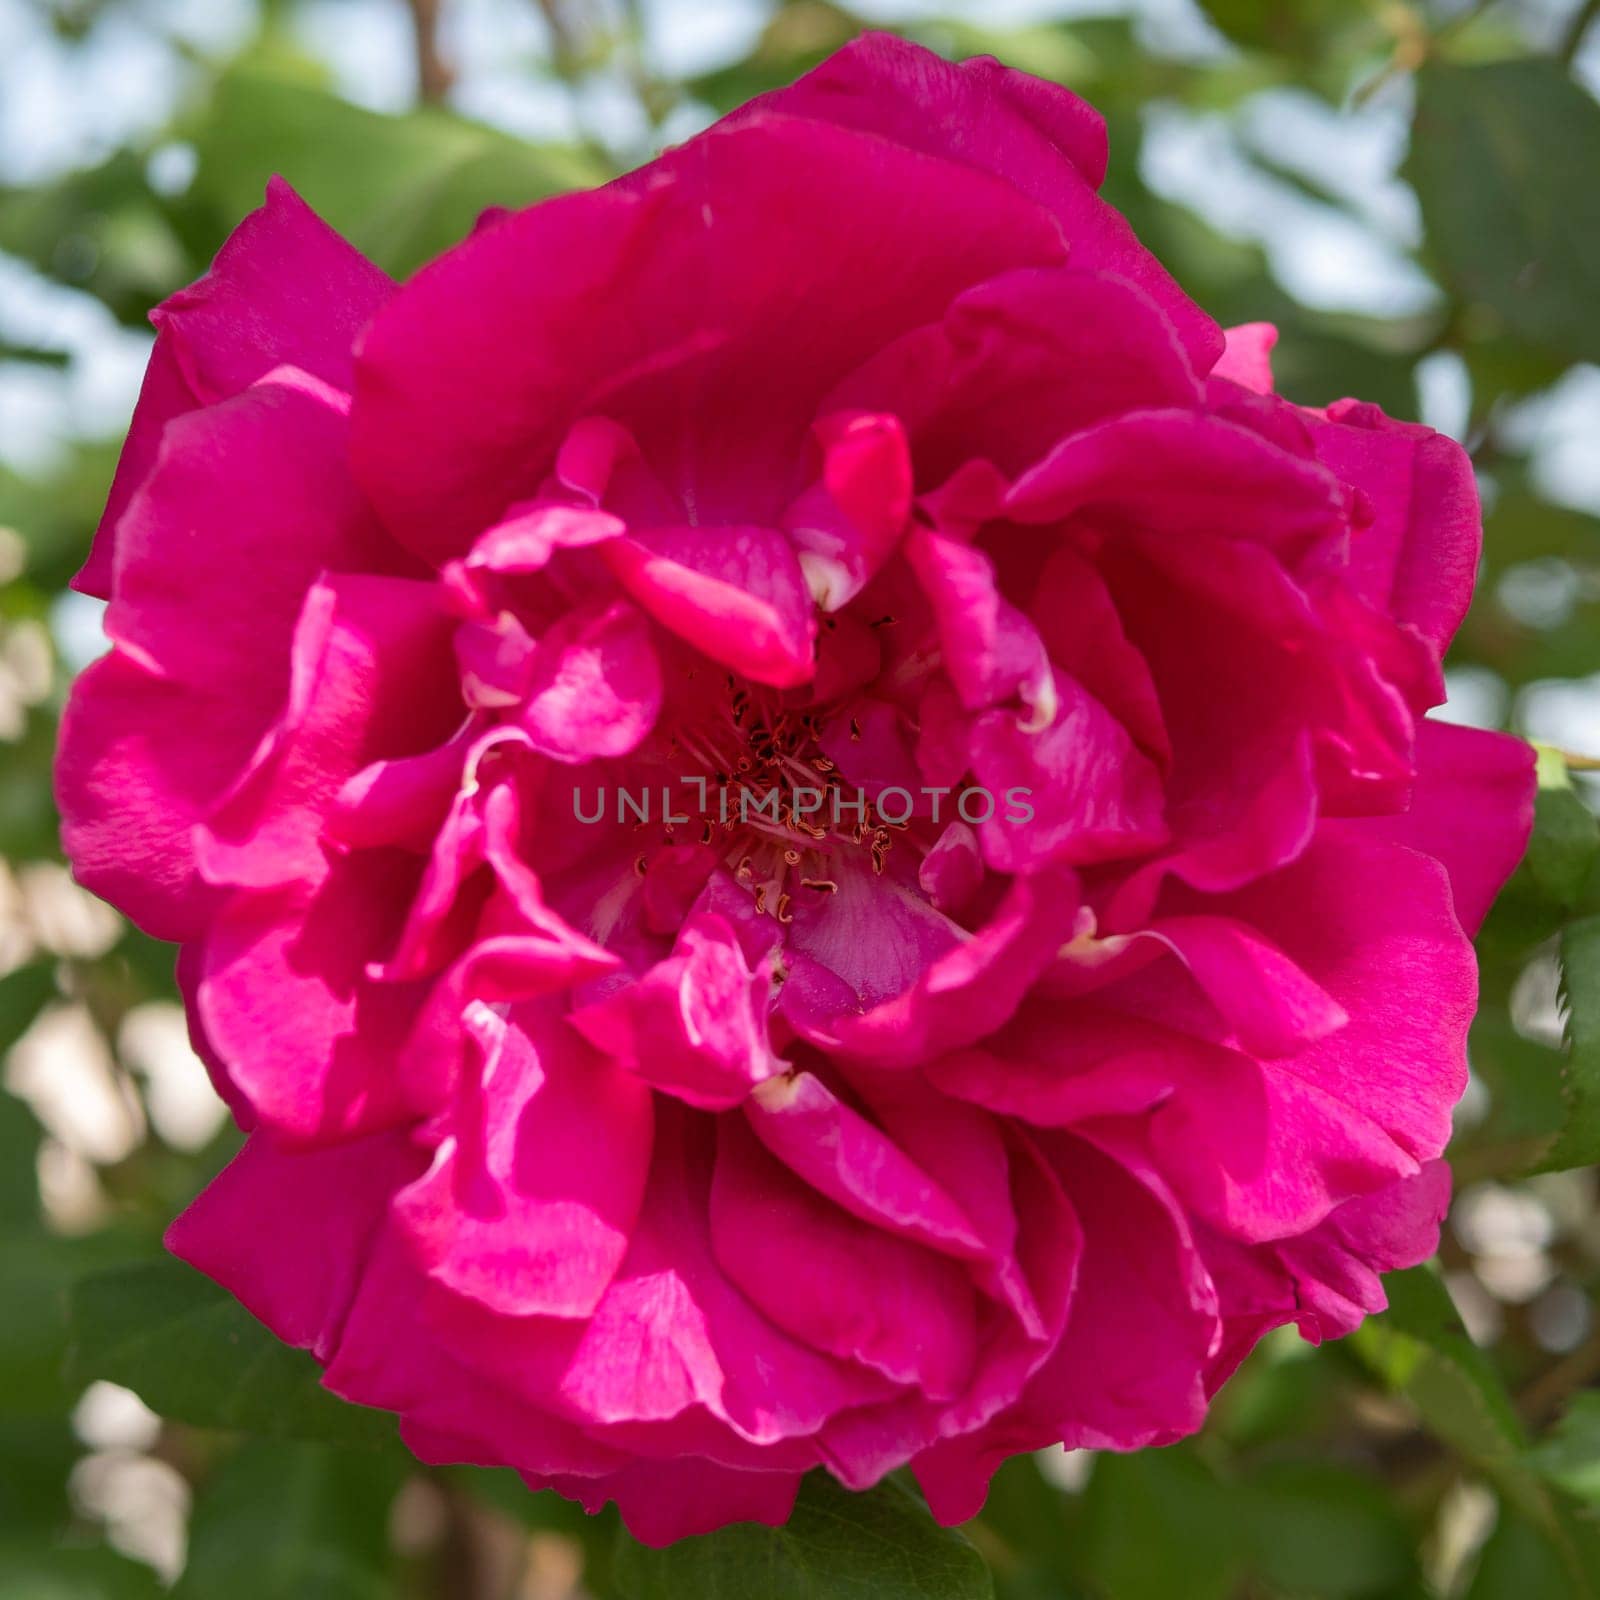 Close up of pink rose with green leaves in the garden by jackreznor